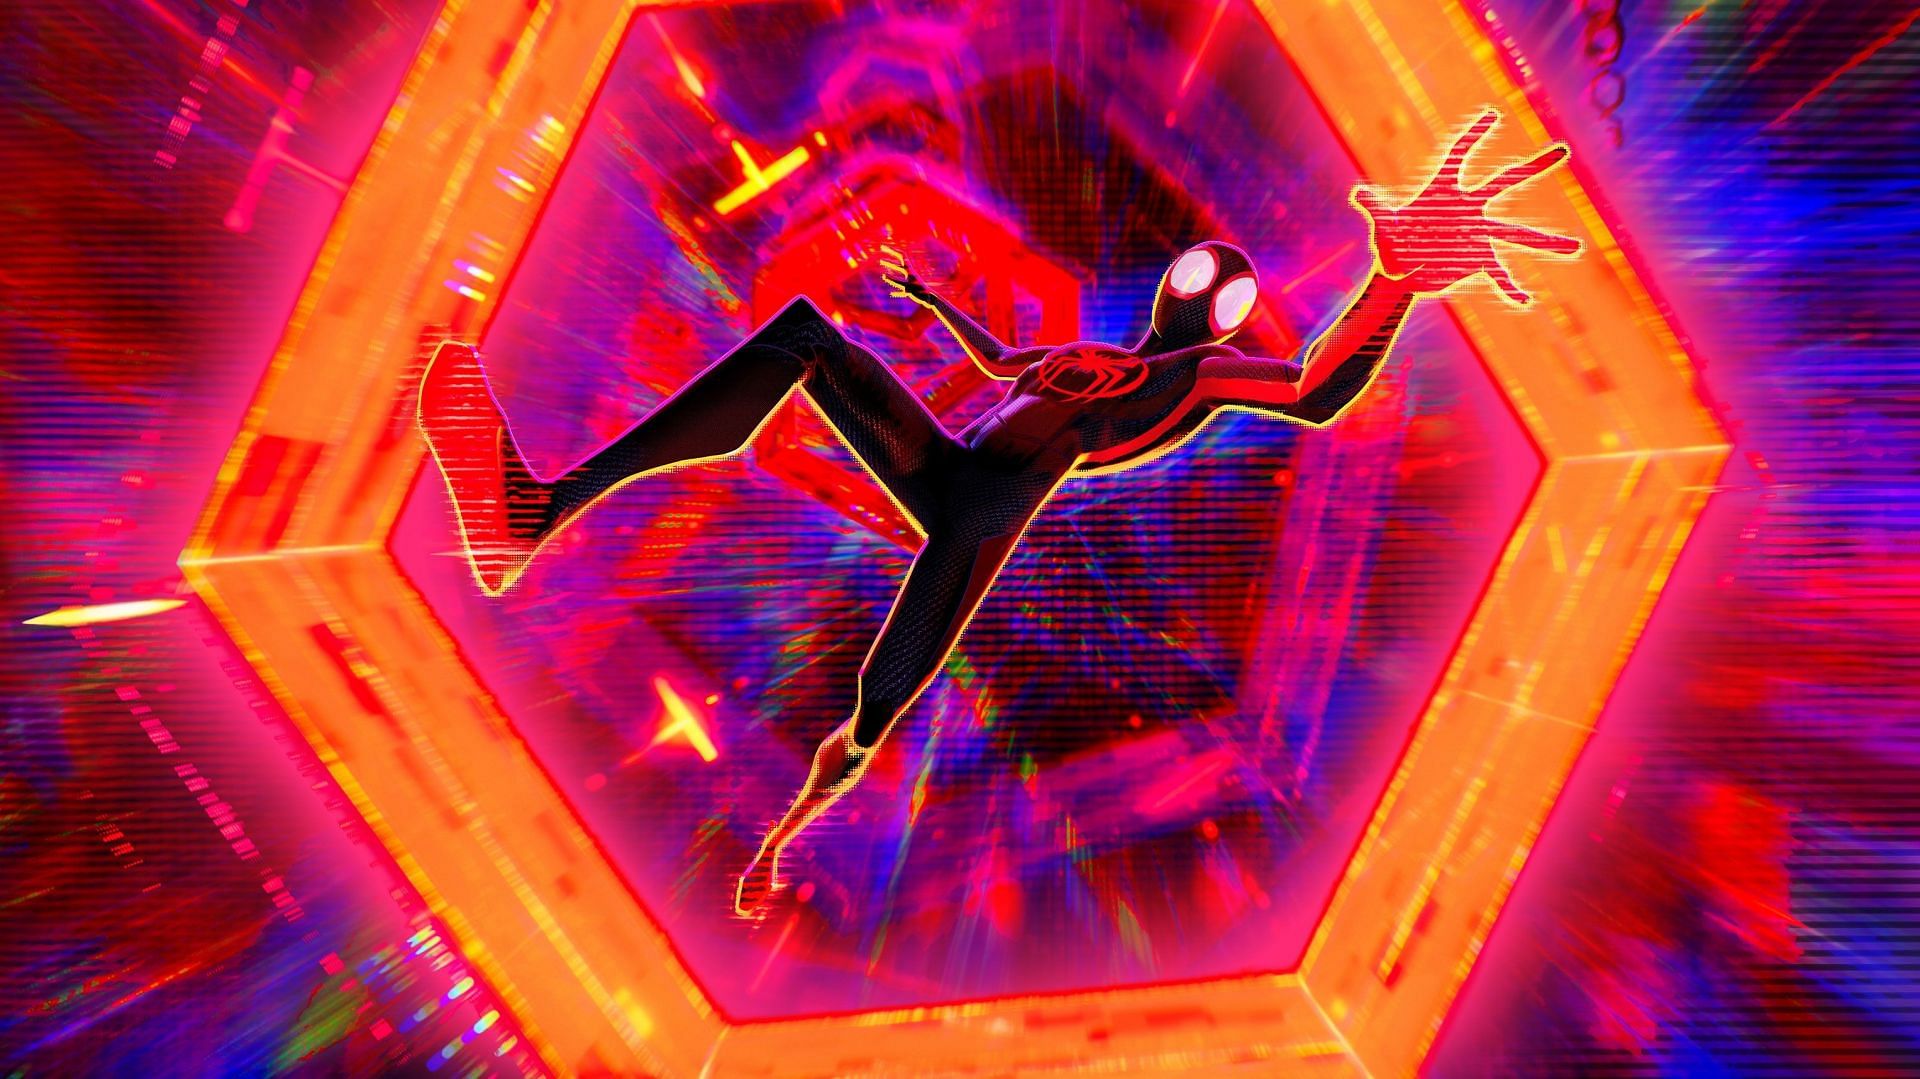 Unraveling the Multiverse: A subtle MCU Easter egg hidden in the intricate webs of Spider-Man: Across the Spider-Verse (Image via Sony Pictures)